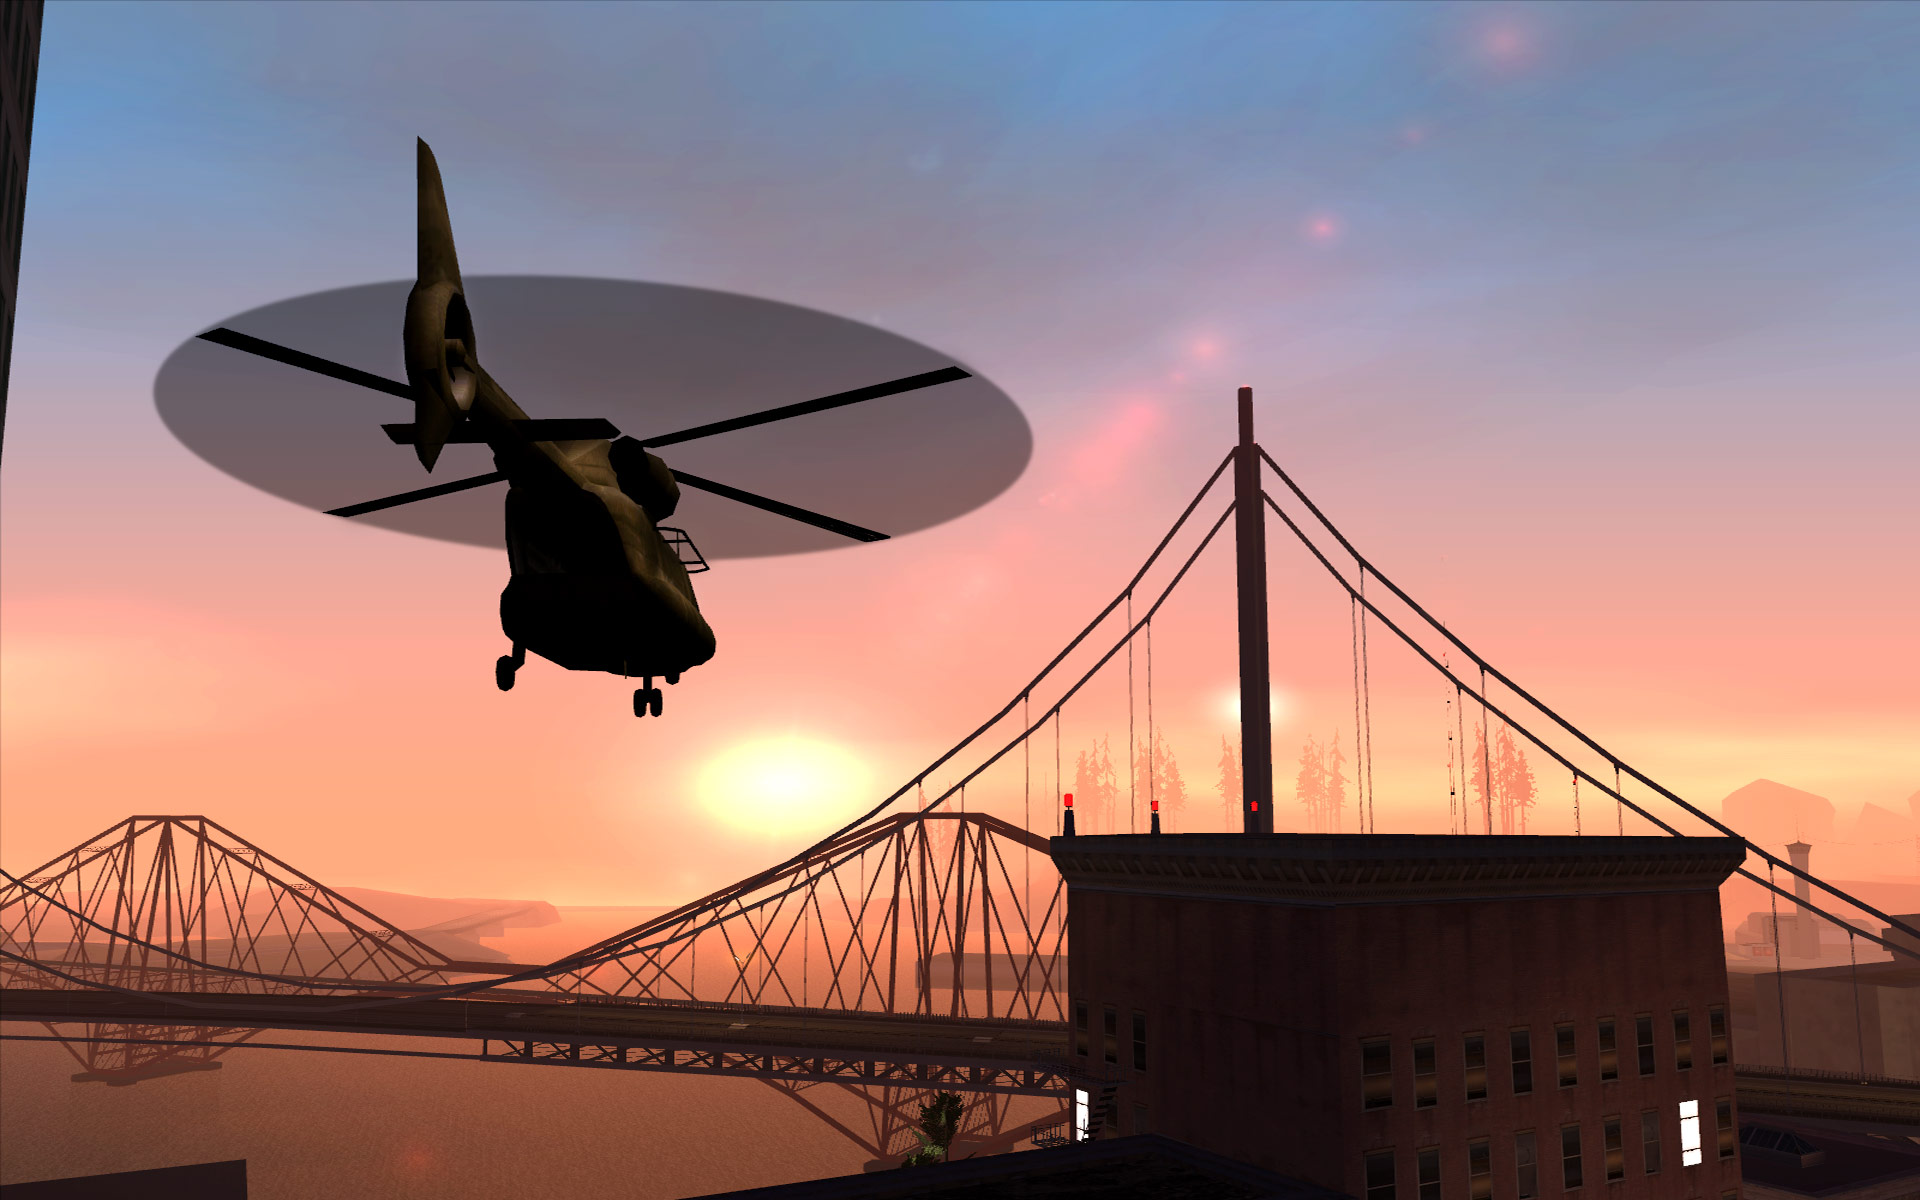 Grand Theft Auto: San Andreas - Steam Background by Hotripak on DeviantArt